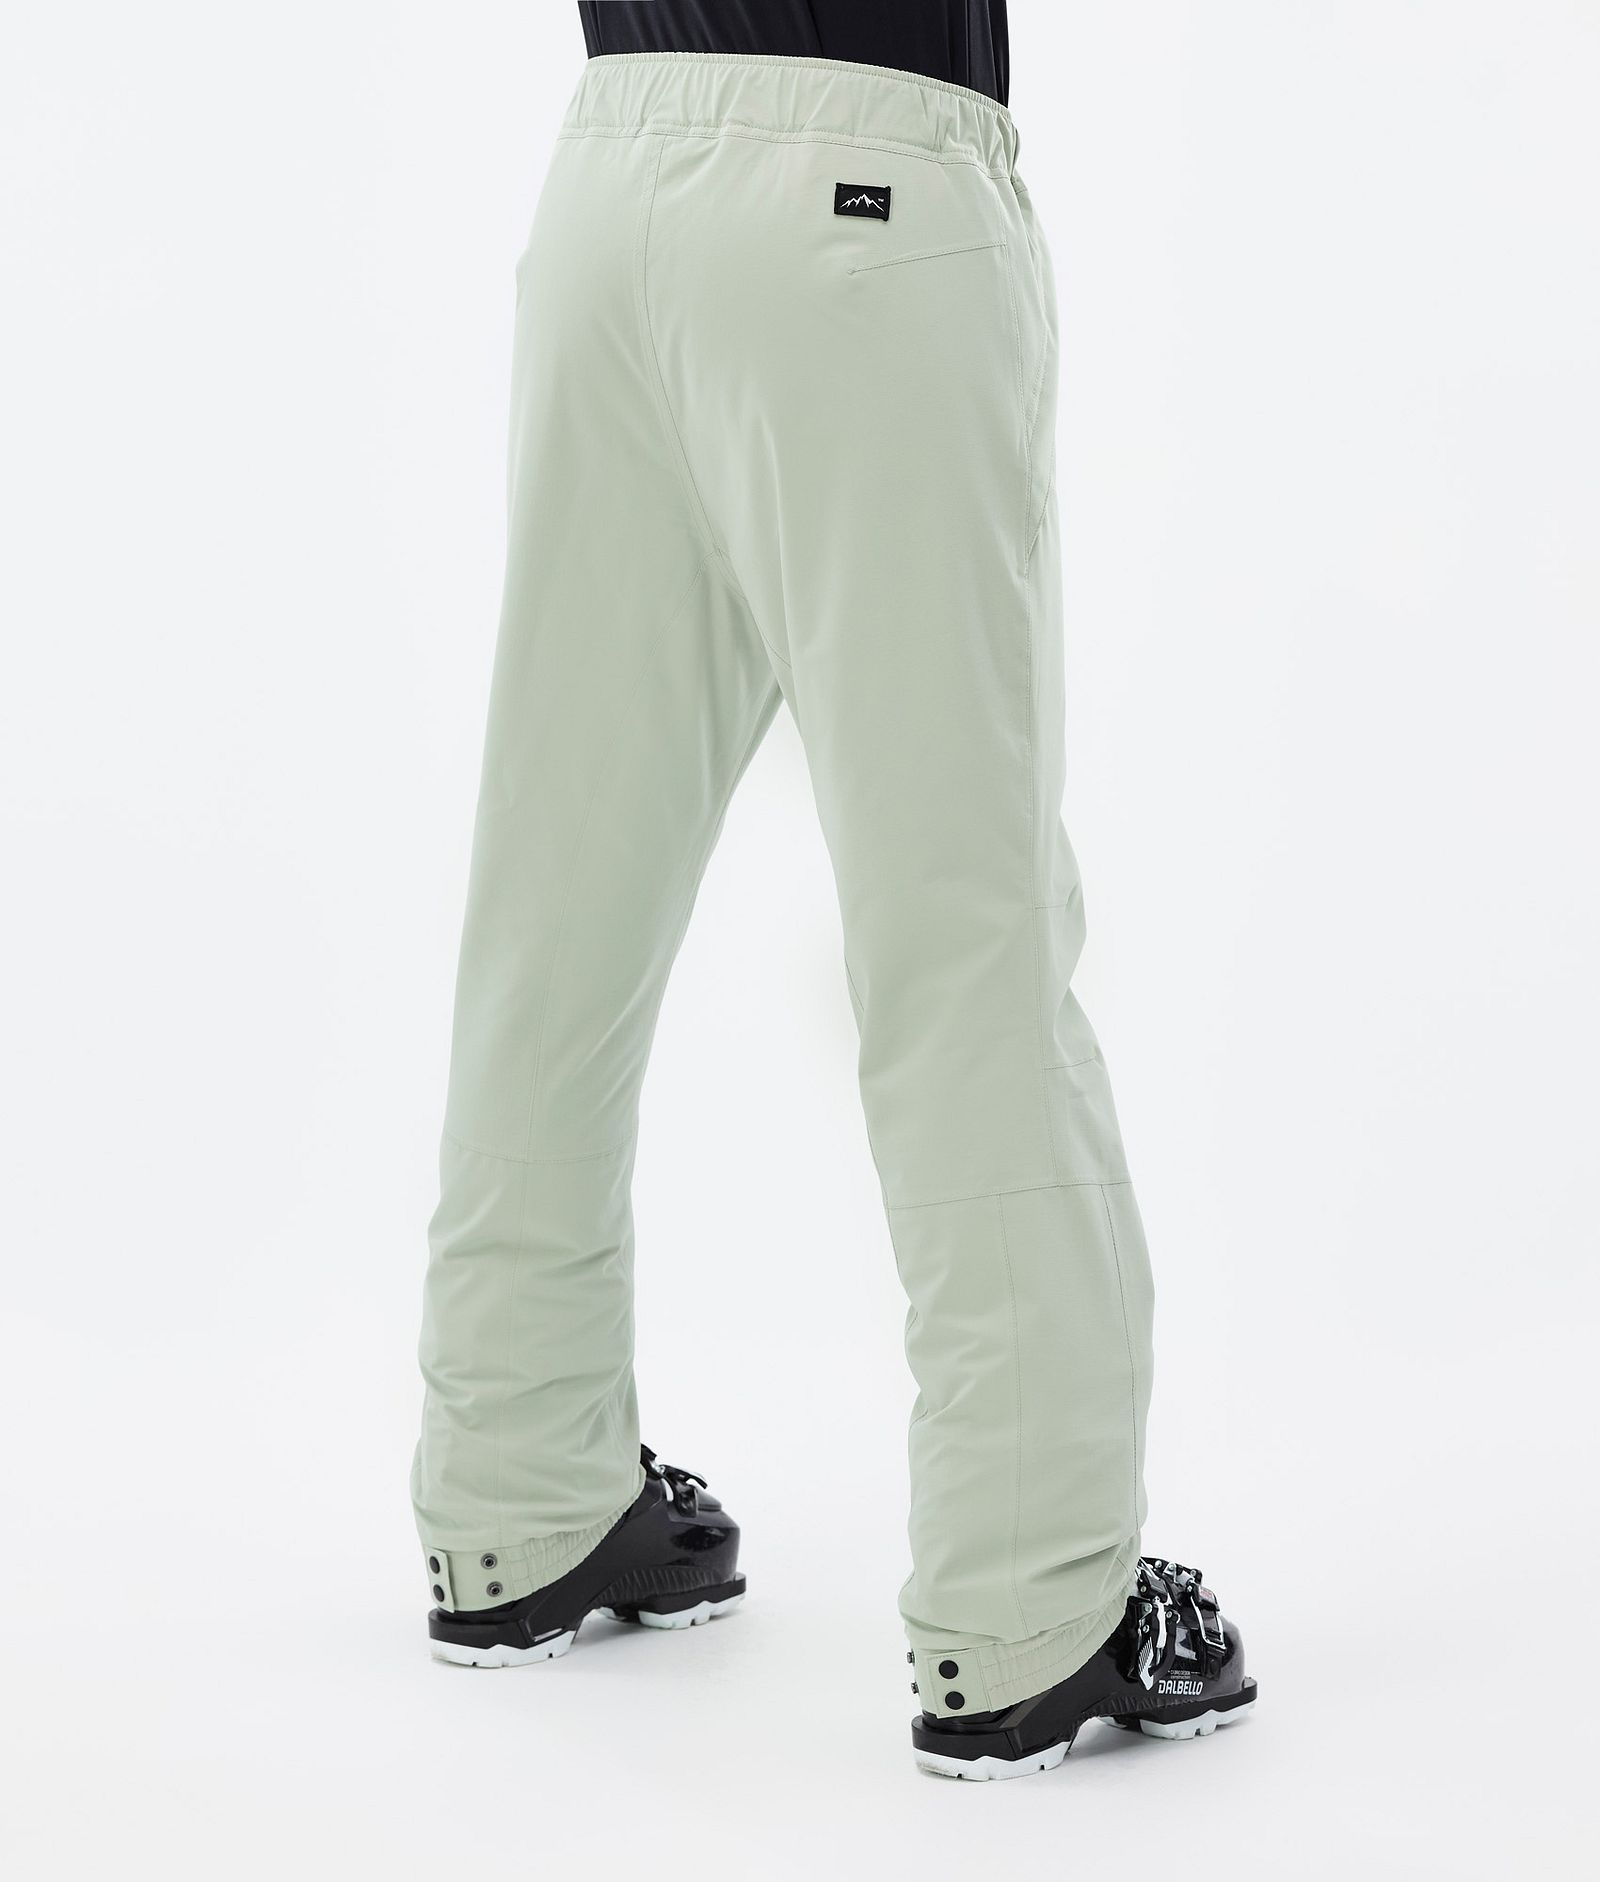 Dope Blizzard W 2022 Pantalones Esquí Mujer Soft Green